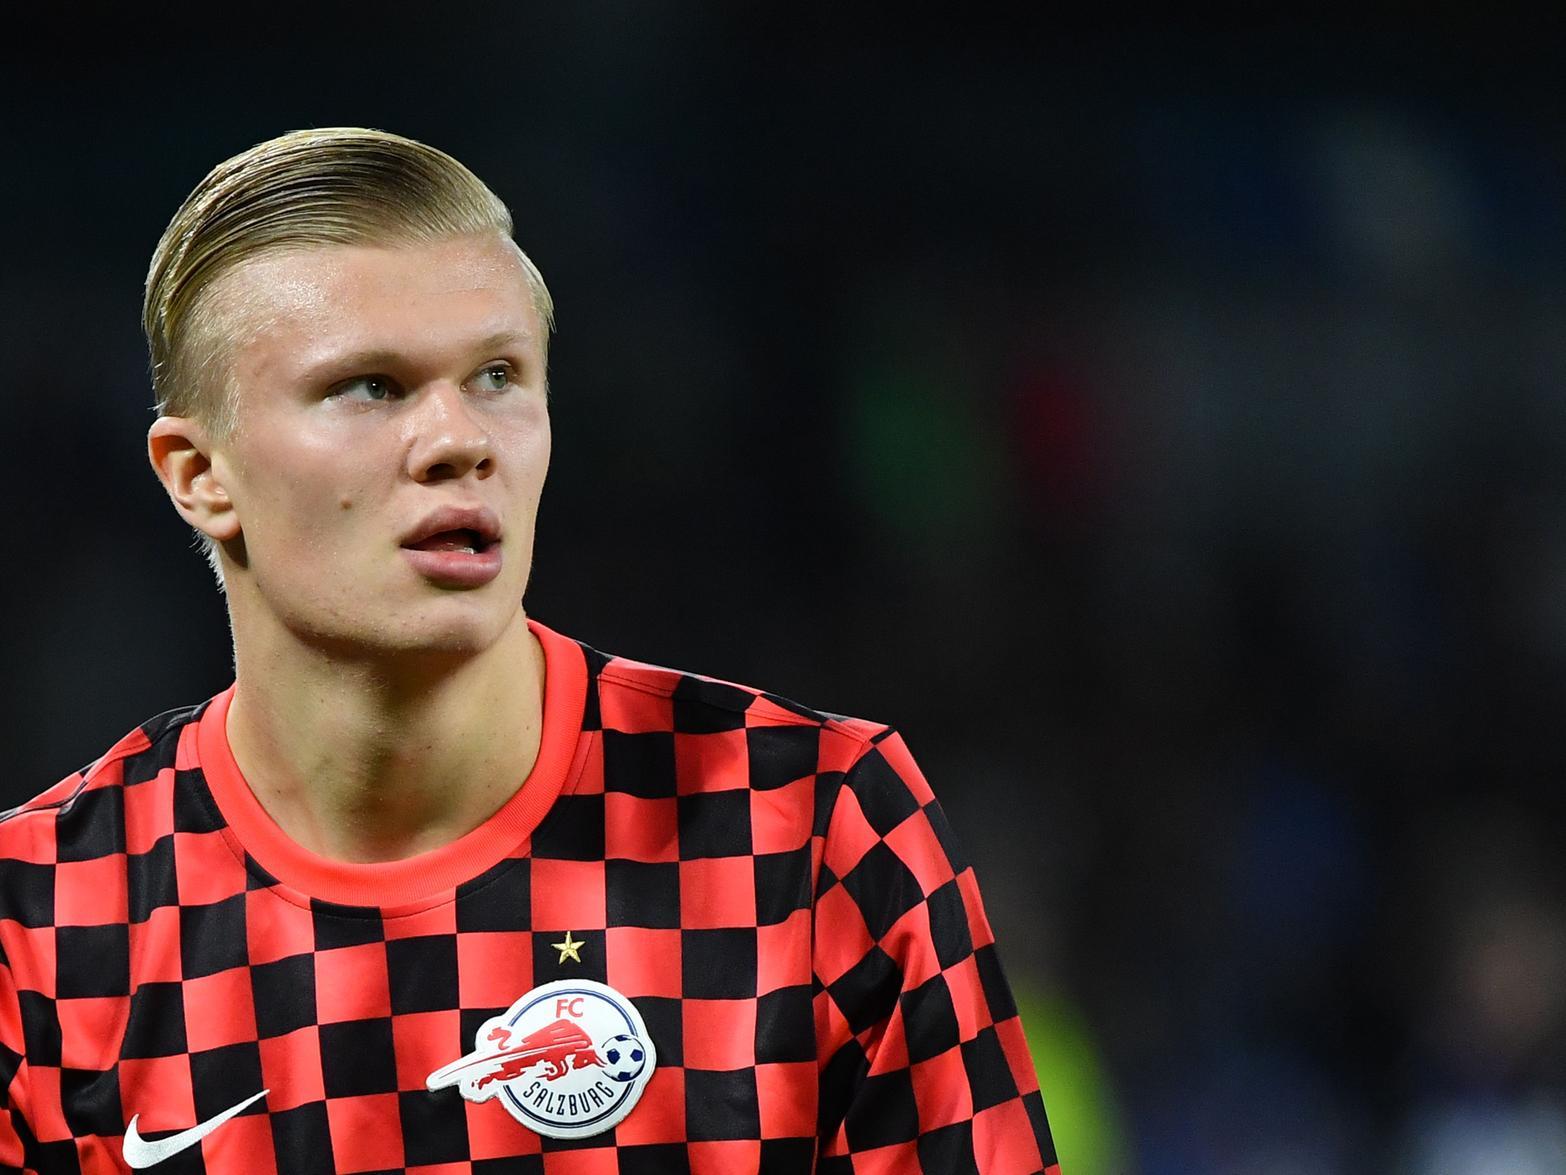 Should Leeds United secure promotion, RB Salzburg striker Erling Haaland couldsensationally join the Whites instead of Man Utd, as his advisers believe he needs to join a "stepping stone" club.(Daily Star)